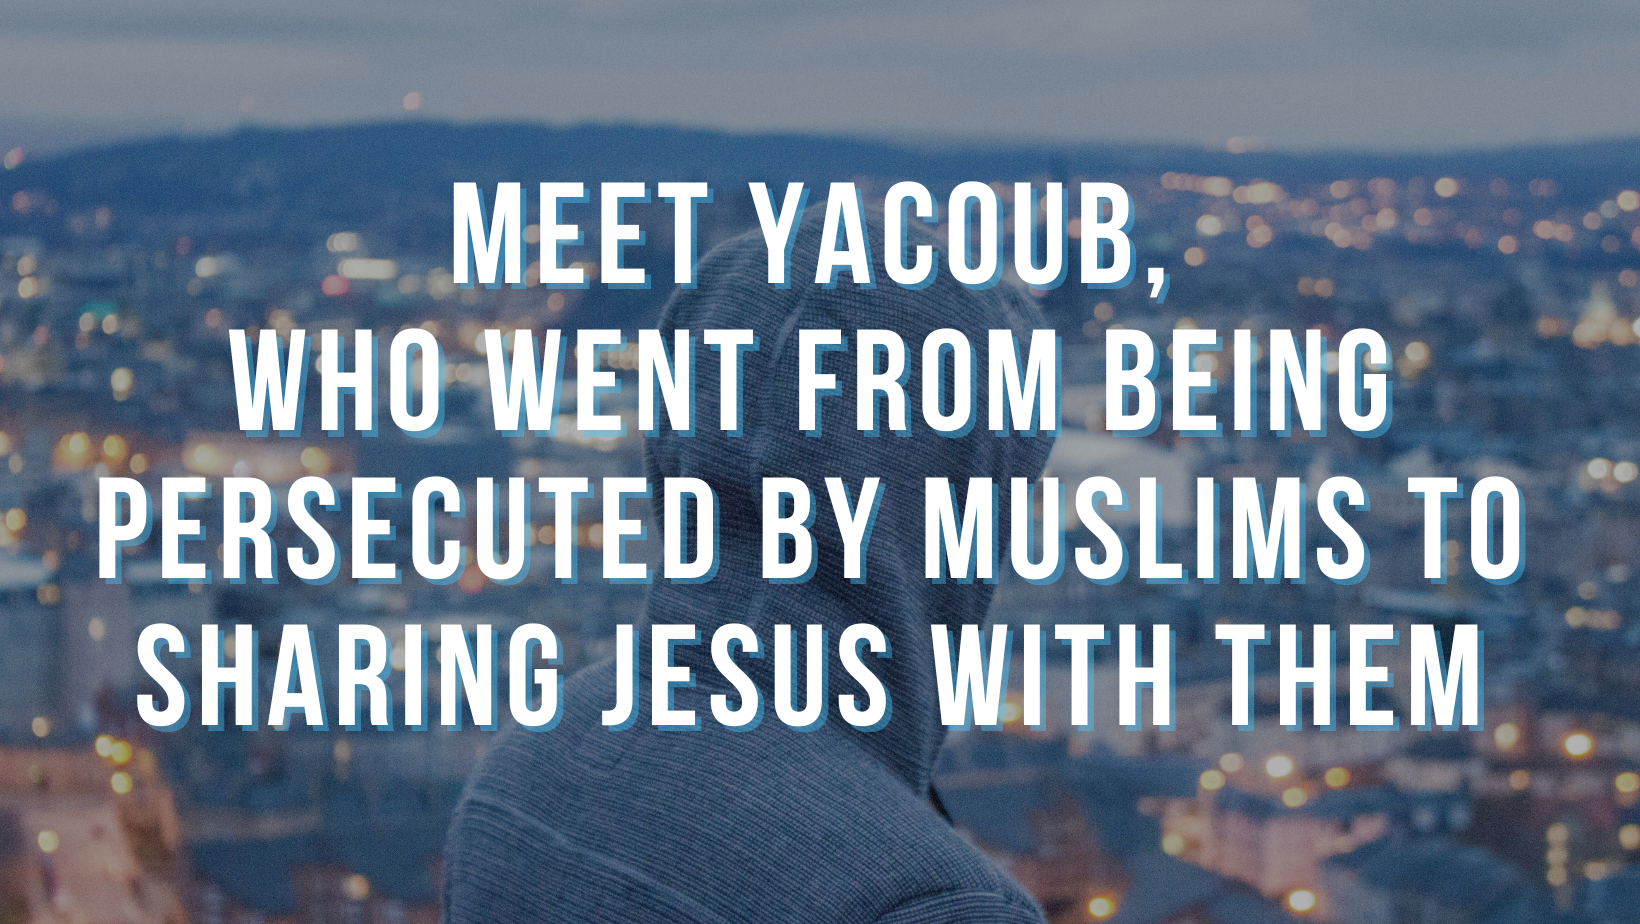 Meet Yacoub, who went from being persecuted by Muslims to sharing Jesus with them